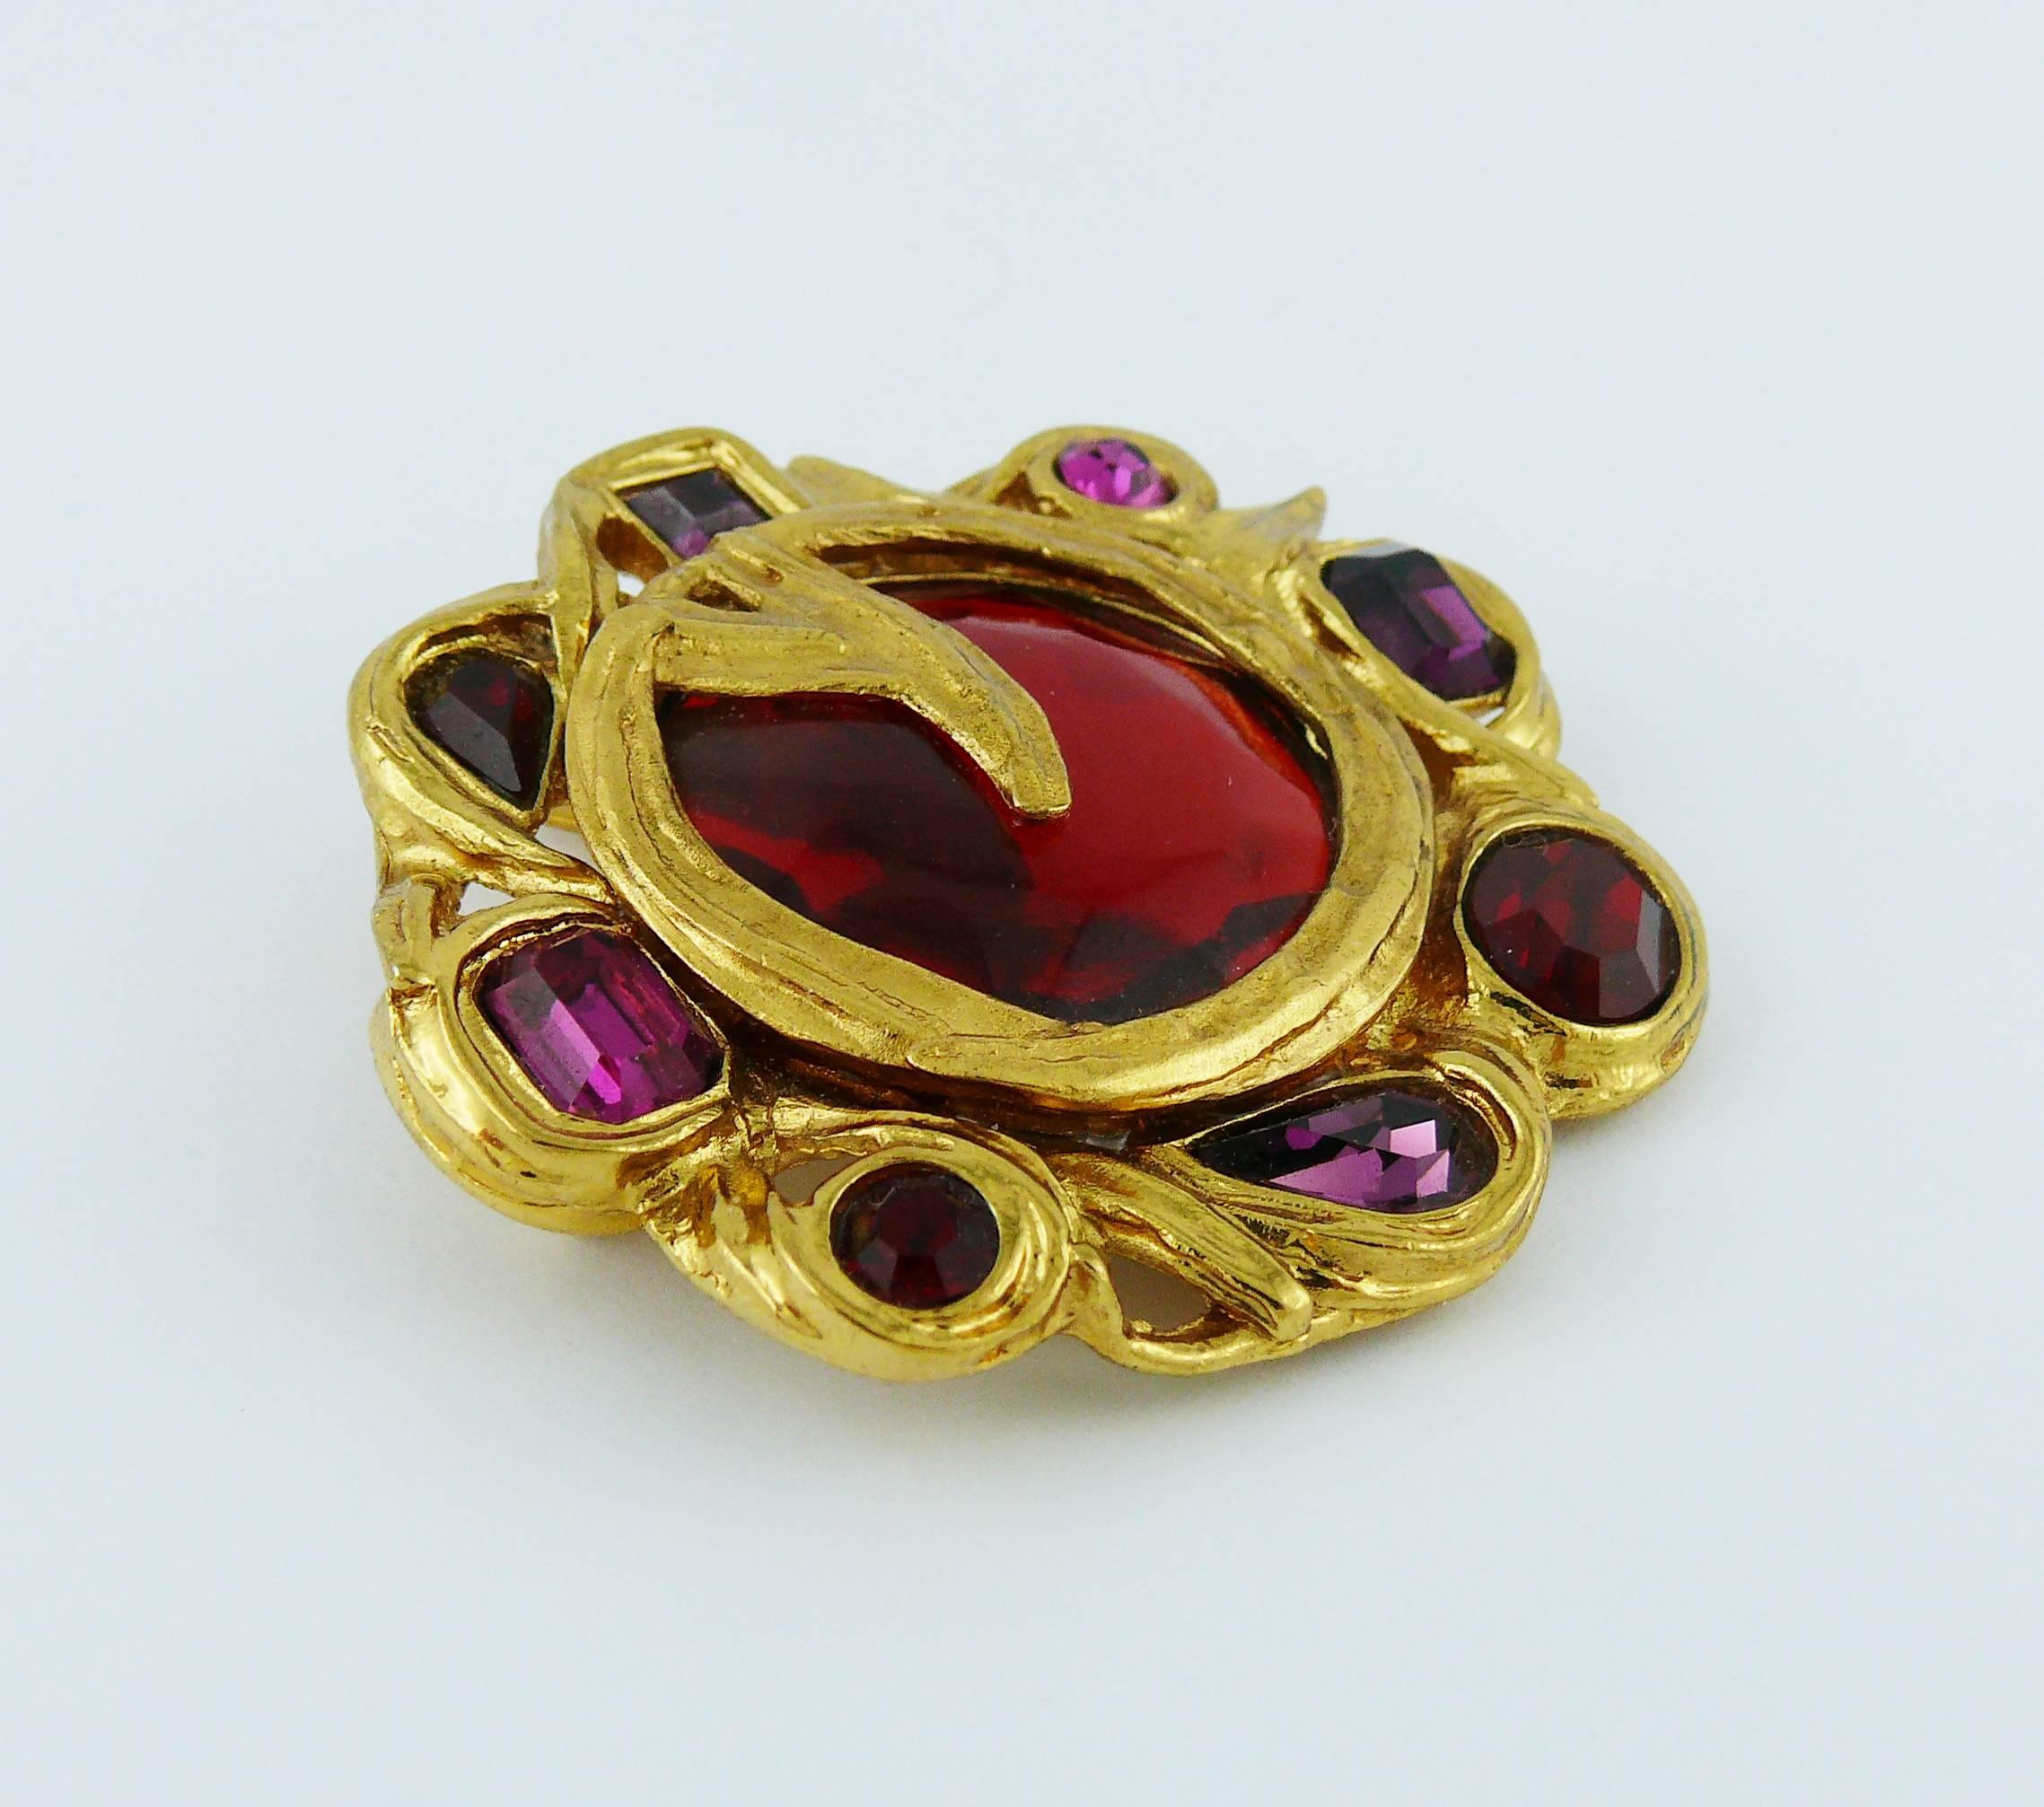 YVES SAINT LAURENT vintage gold toned brooch/pendant embellished with multicolored crystals and large resin cabochon.

Can be worn as a pendant.

Embossed YSL Made in France.

Indicative measurements : max. height approx. 5 cm (1.97 inches) / max.